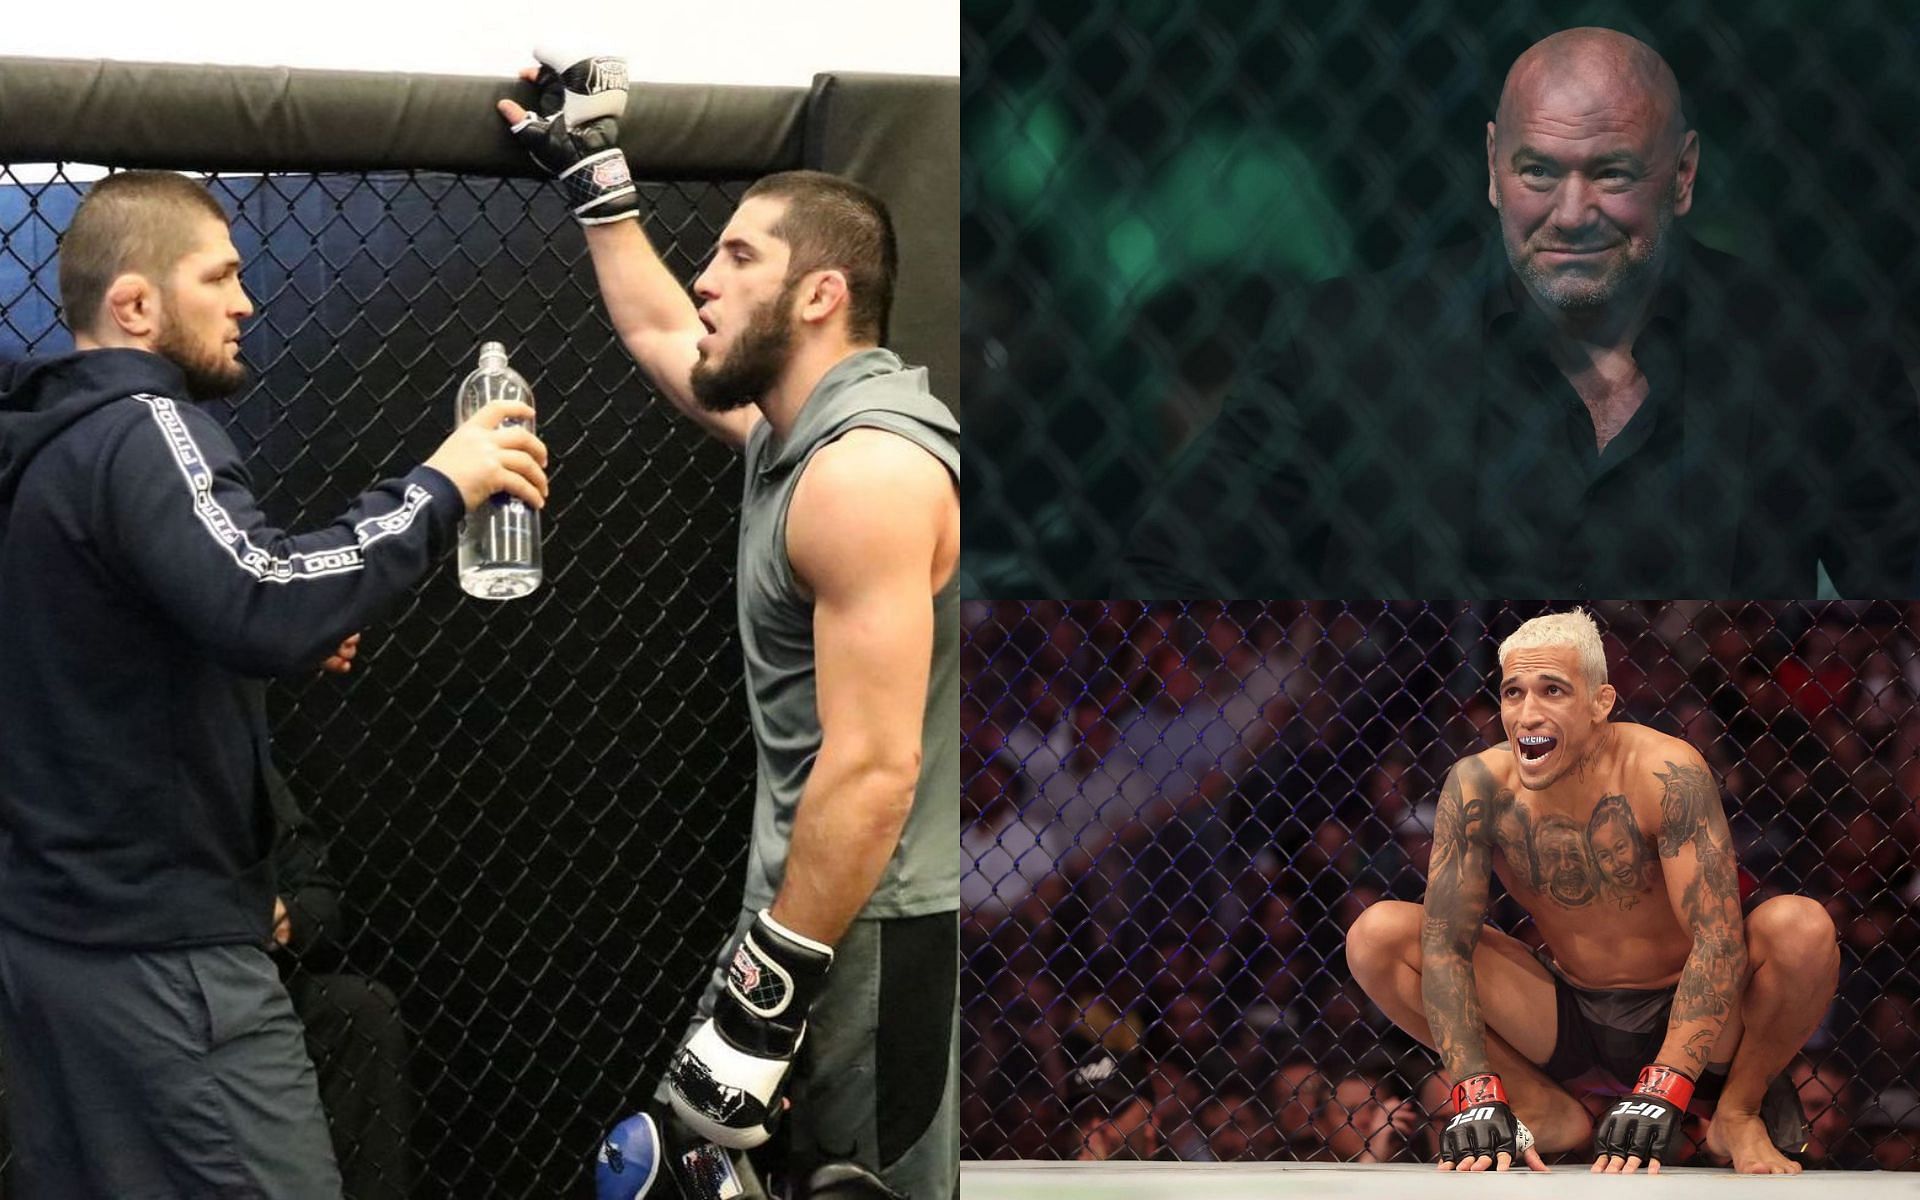 Khabib Nurmagomedov and Islam Makhachev (left), Dana White (top right) and Charles Oliveira (bottom right) [Images courtesy of islam_makhachev Instagram and Getty]